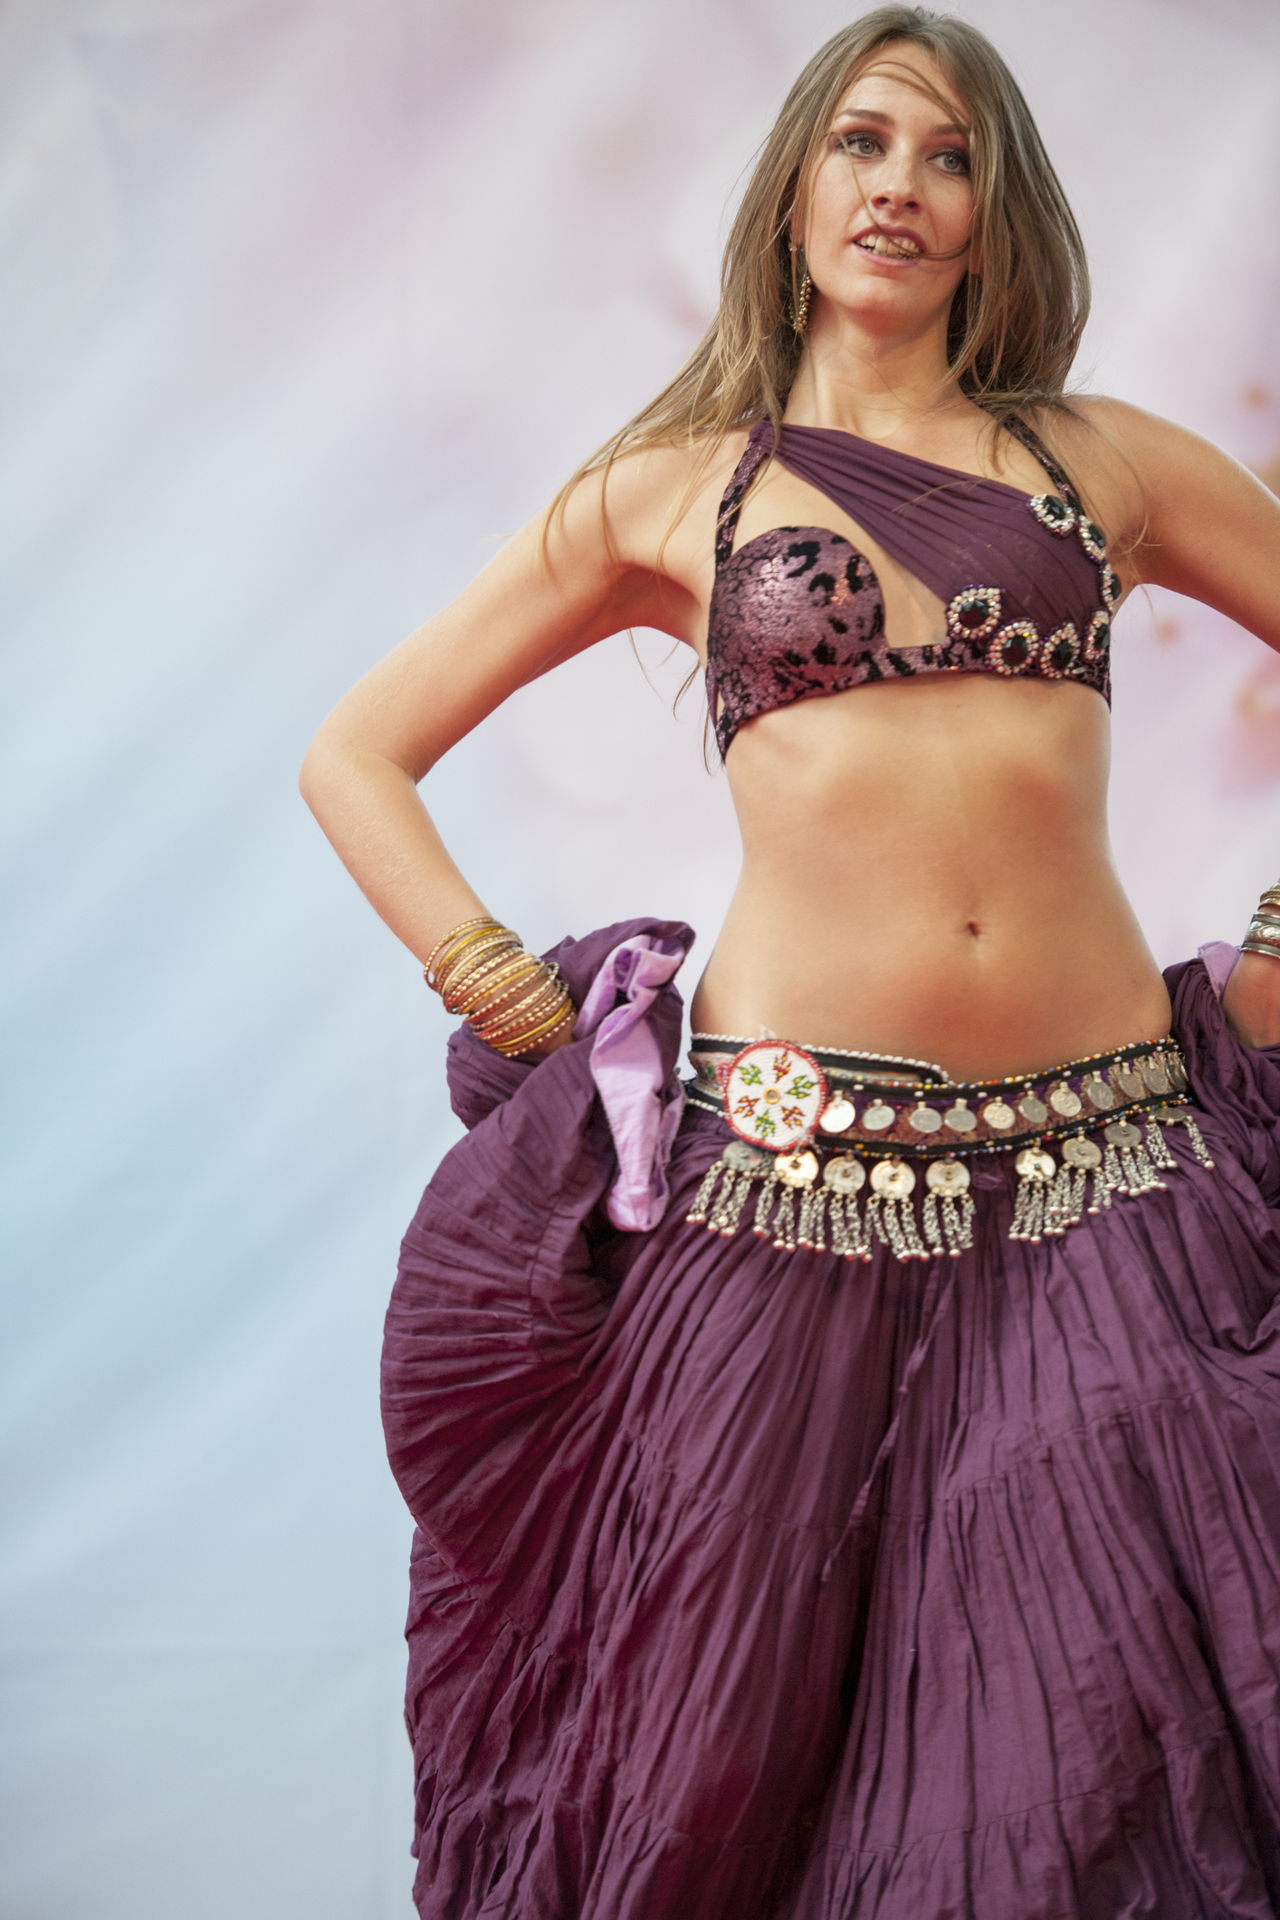 Annihilate wake up Distinction 3 Easy Steps to Make a Gorgeous Belly Dance Costume at Home - Dance Poise